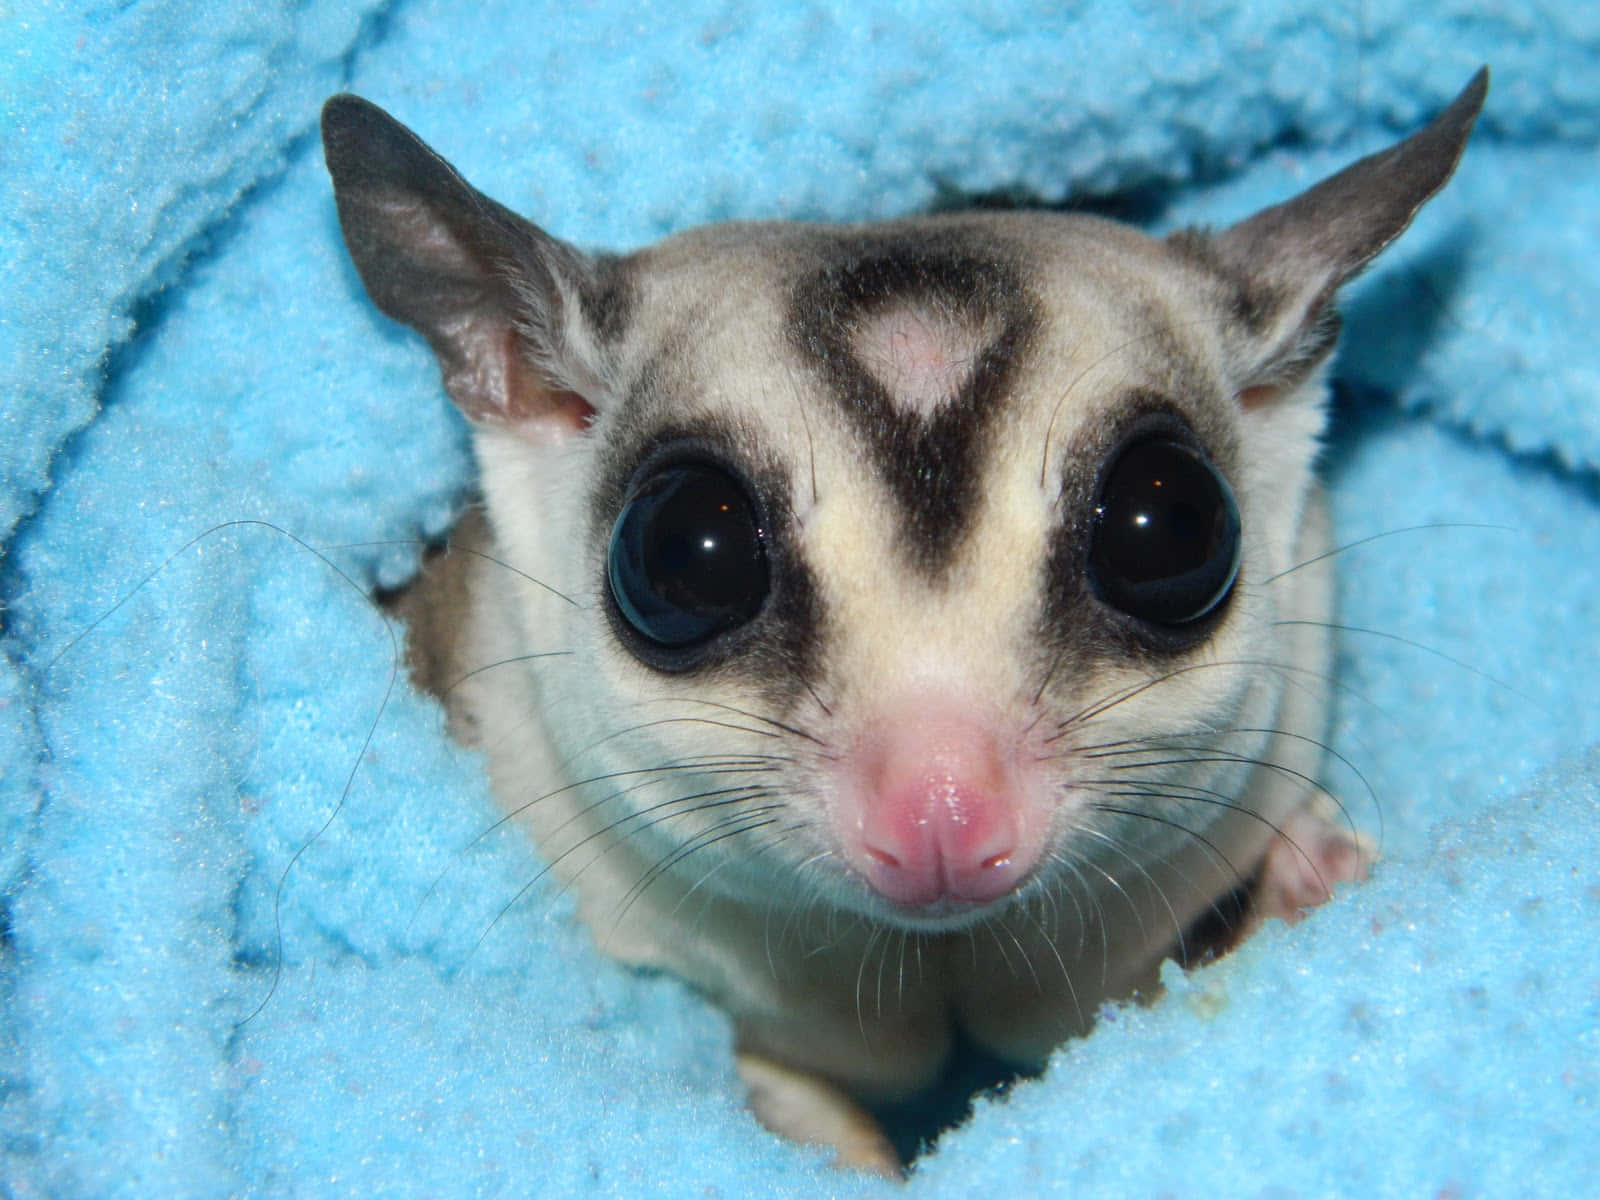 This little Sugar Glider is ready for flight